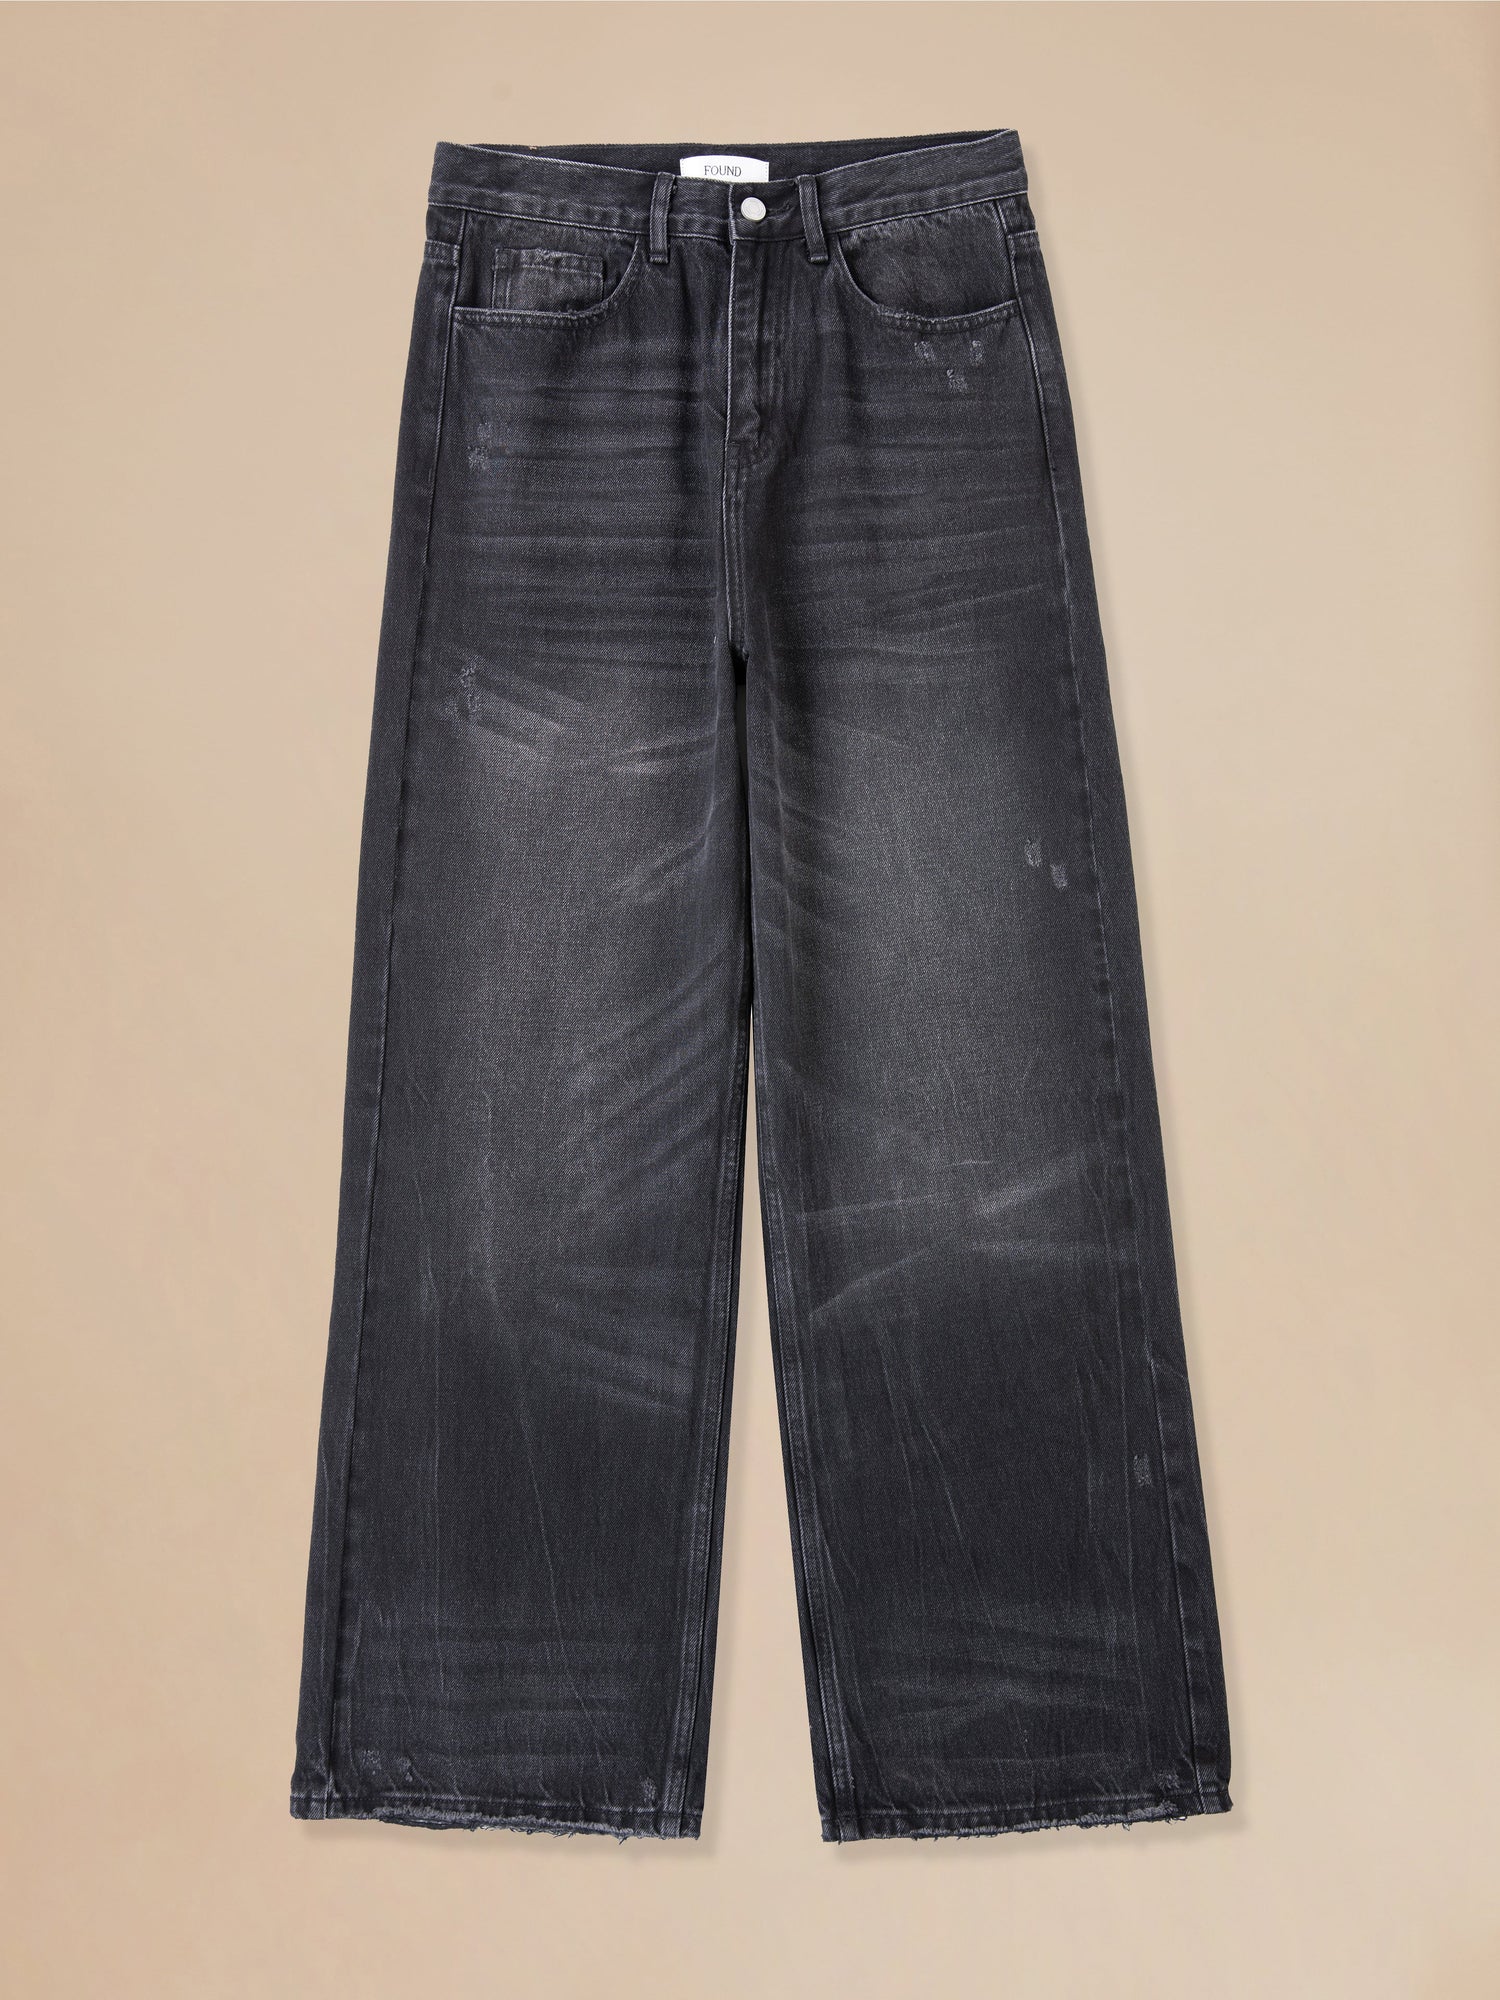 A pair of Found Lacy Baggy Jeans in black wash denim.